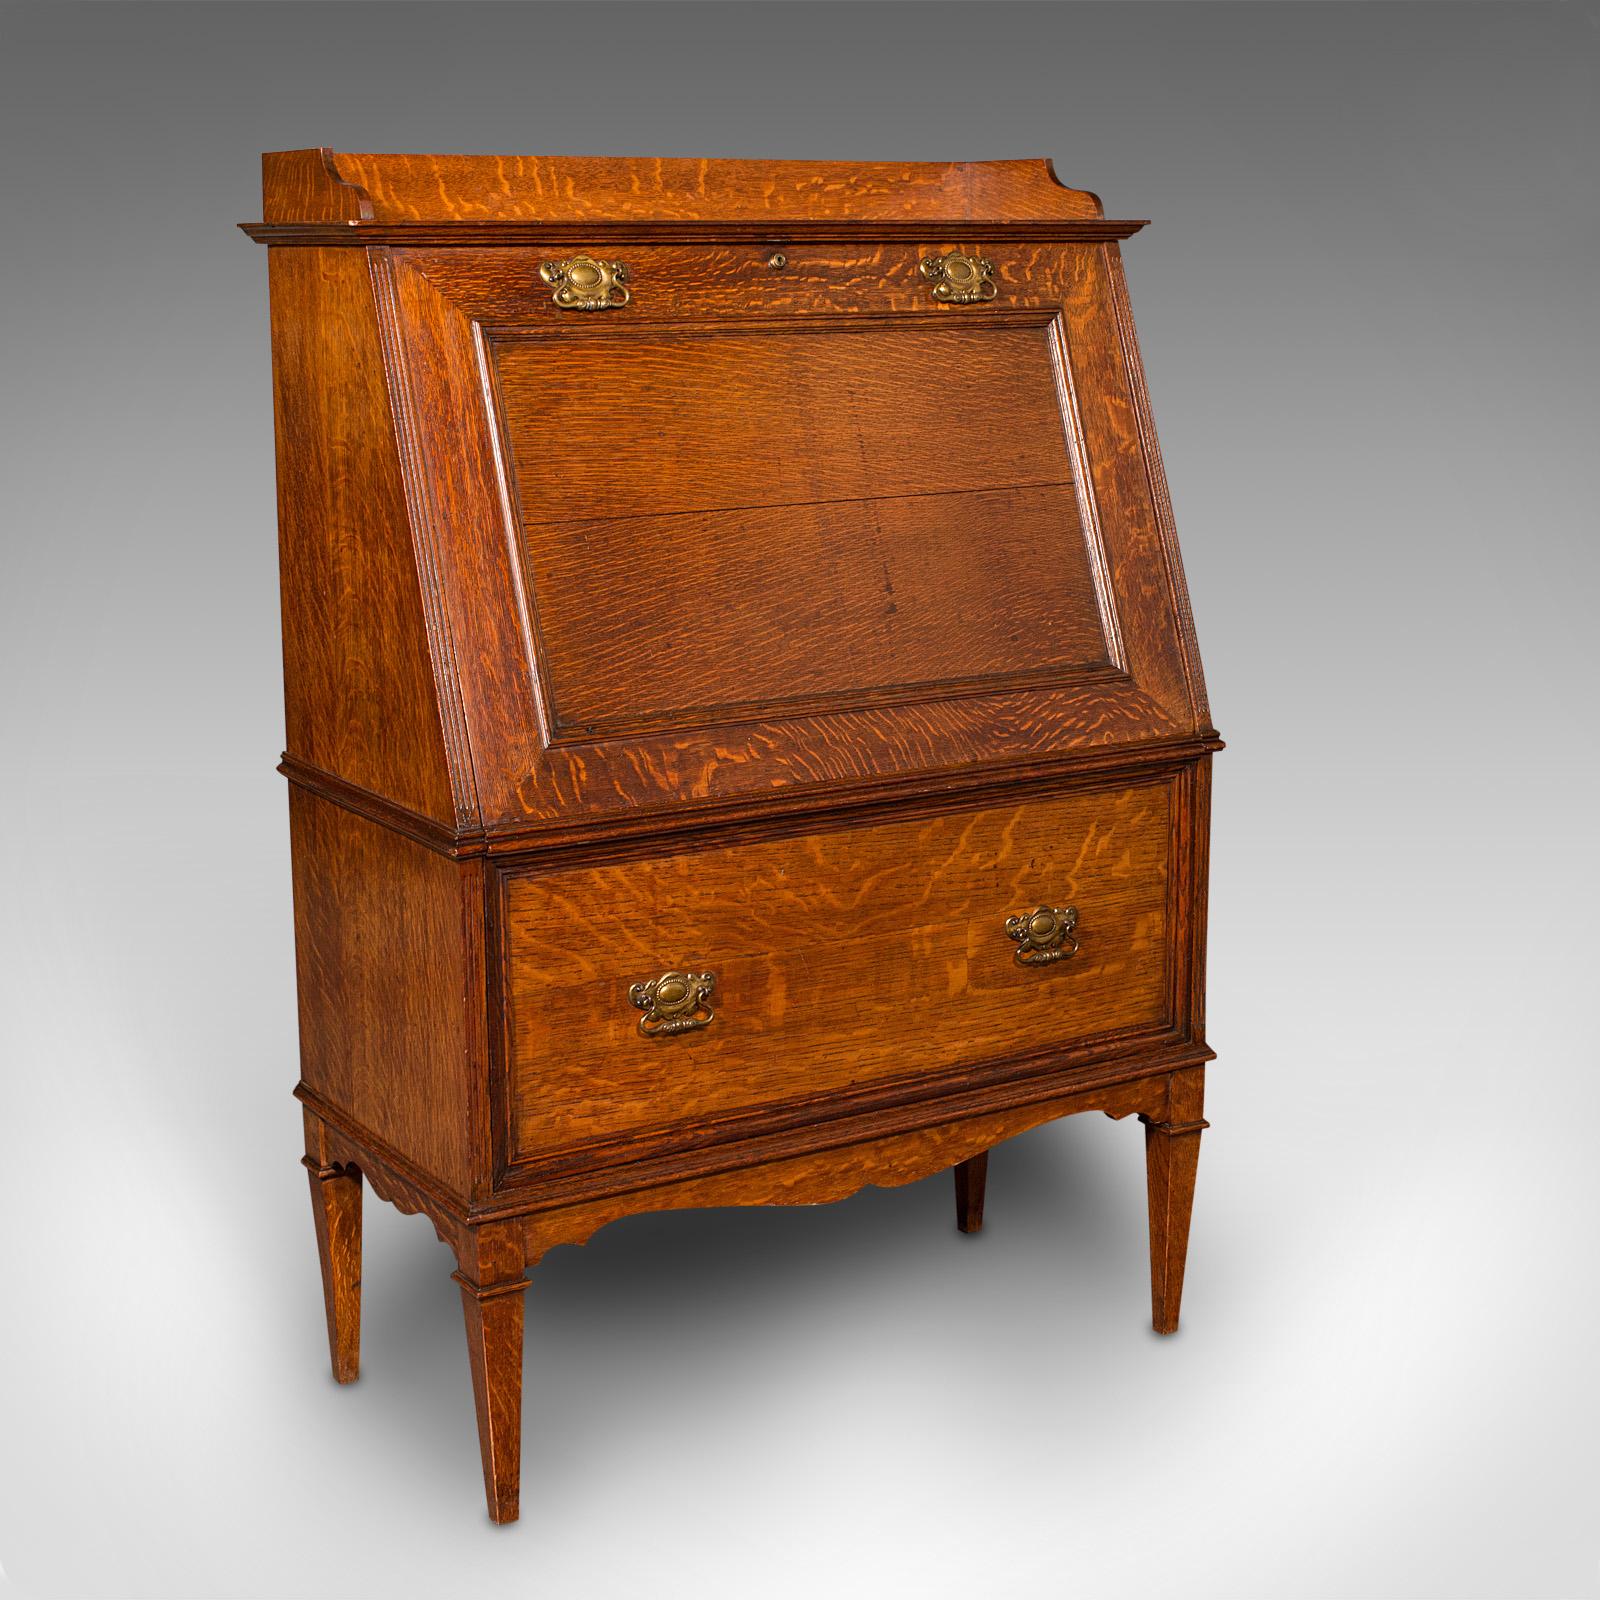 This is an antique metamorphic drinks cabinet. An English, oak bureau form cocktail cabinet, dating to the late Victorian period, circa 1900.

Superior cabinetry with astonishing oak stocks and a delightful bureau form
Displays a desirable aged